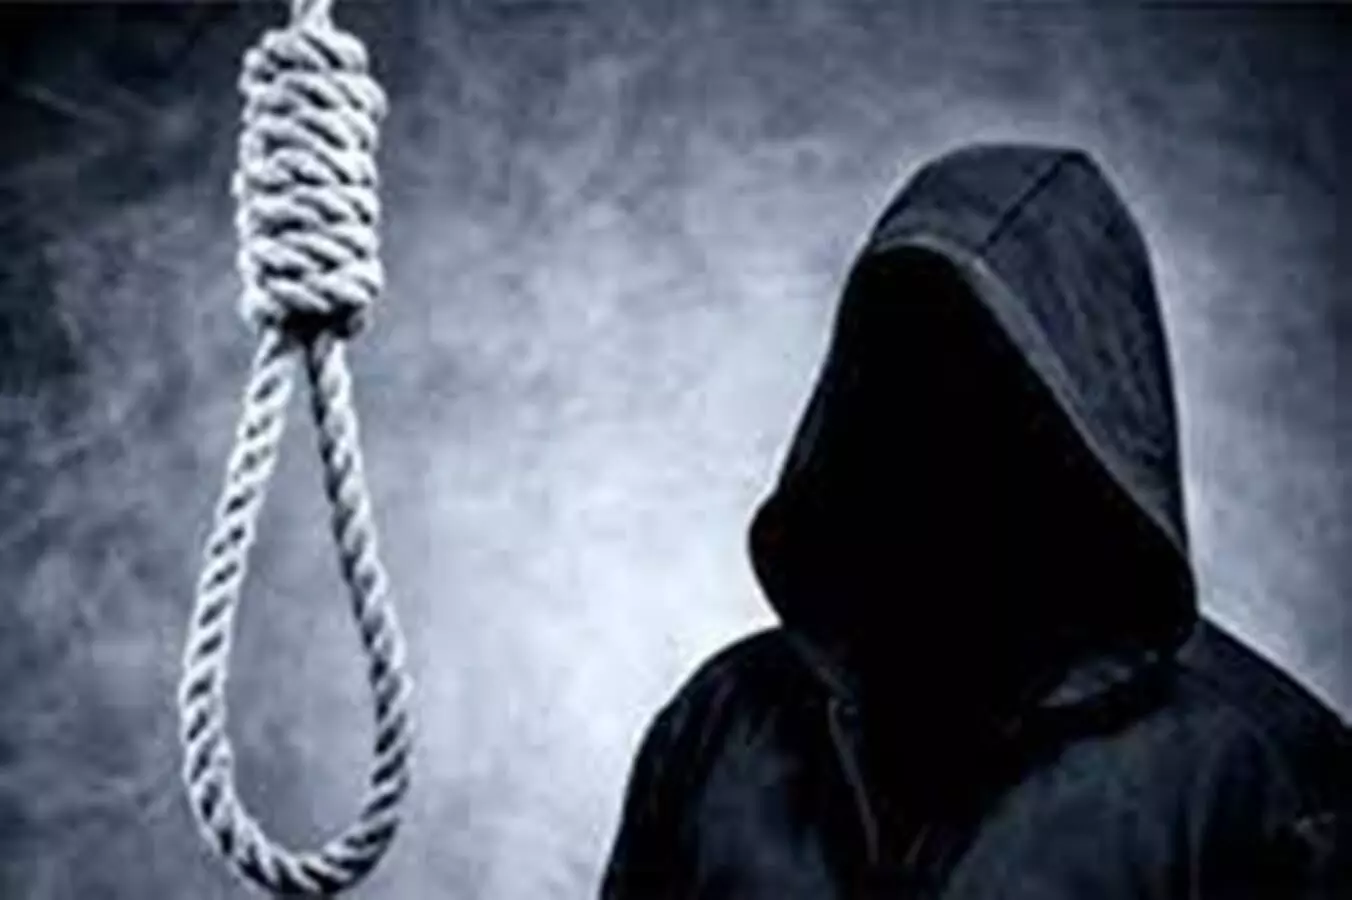 youth committed suicide by hanging